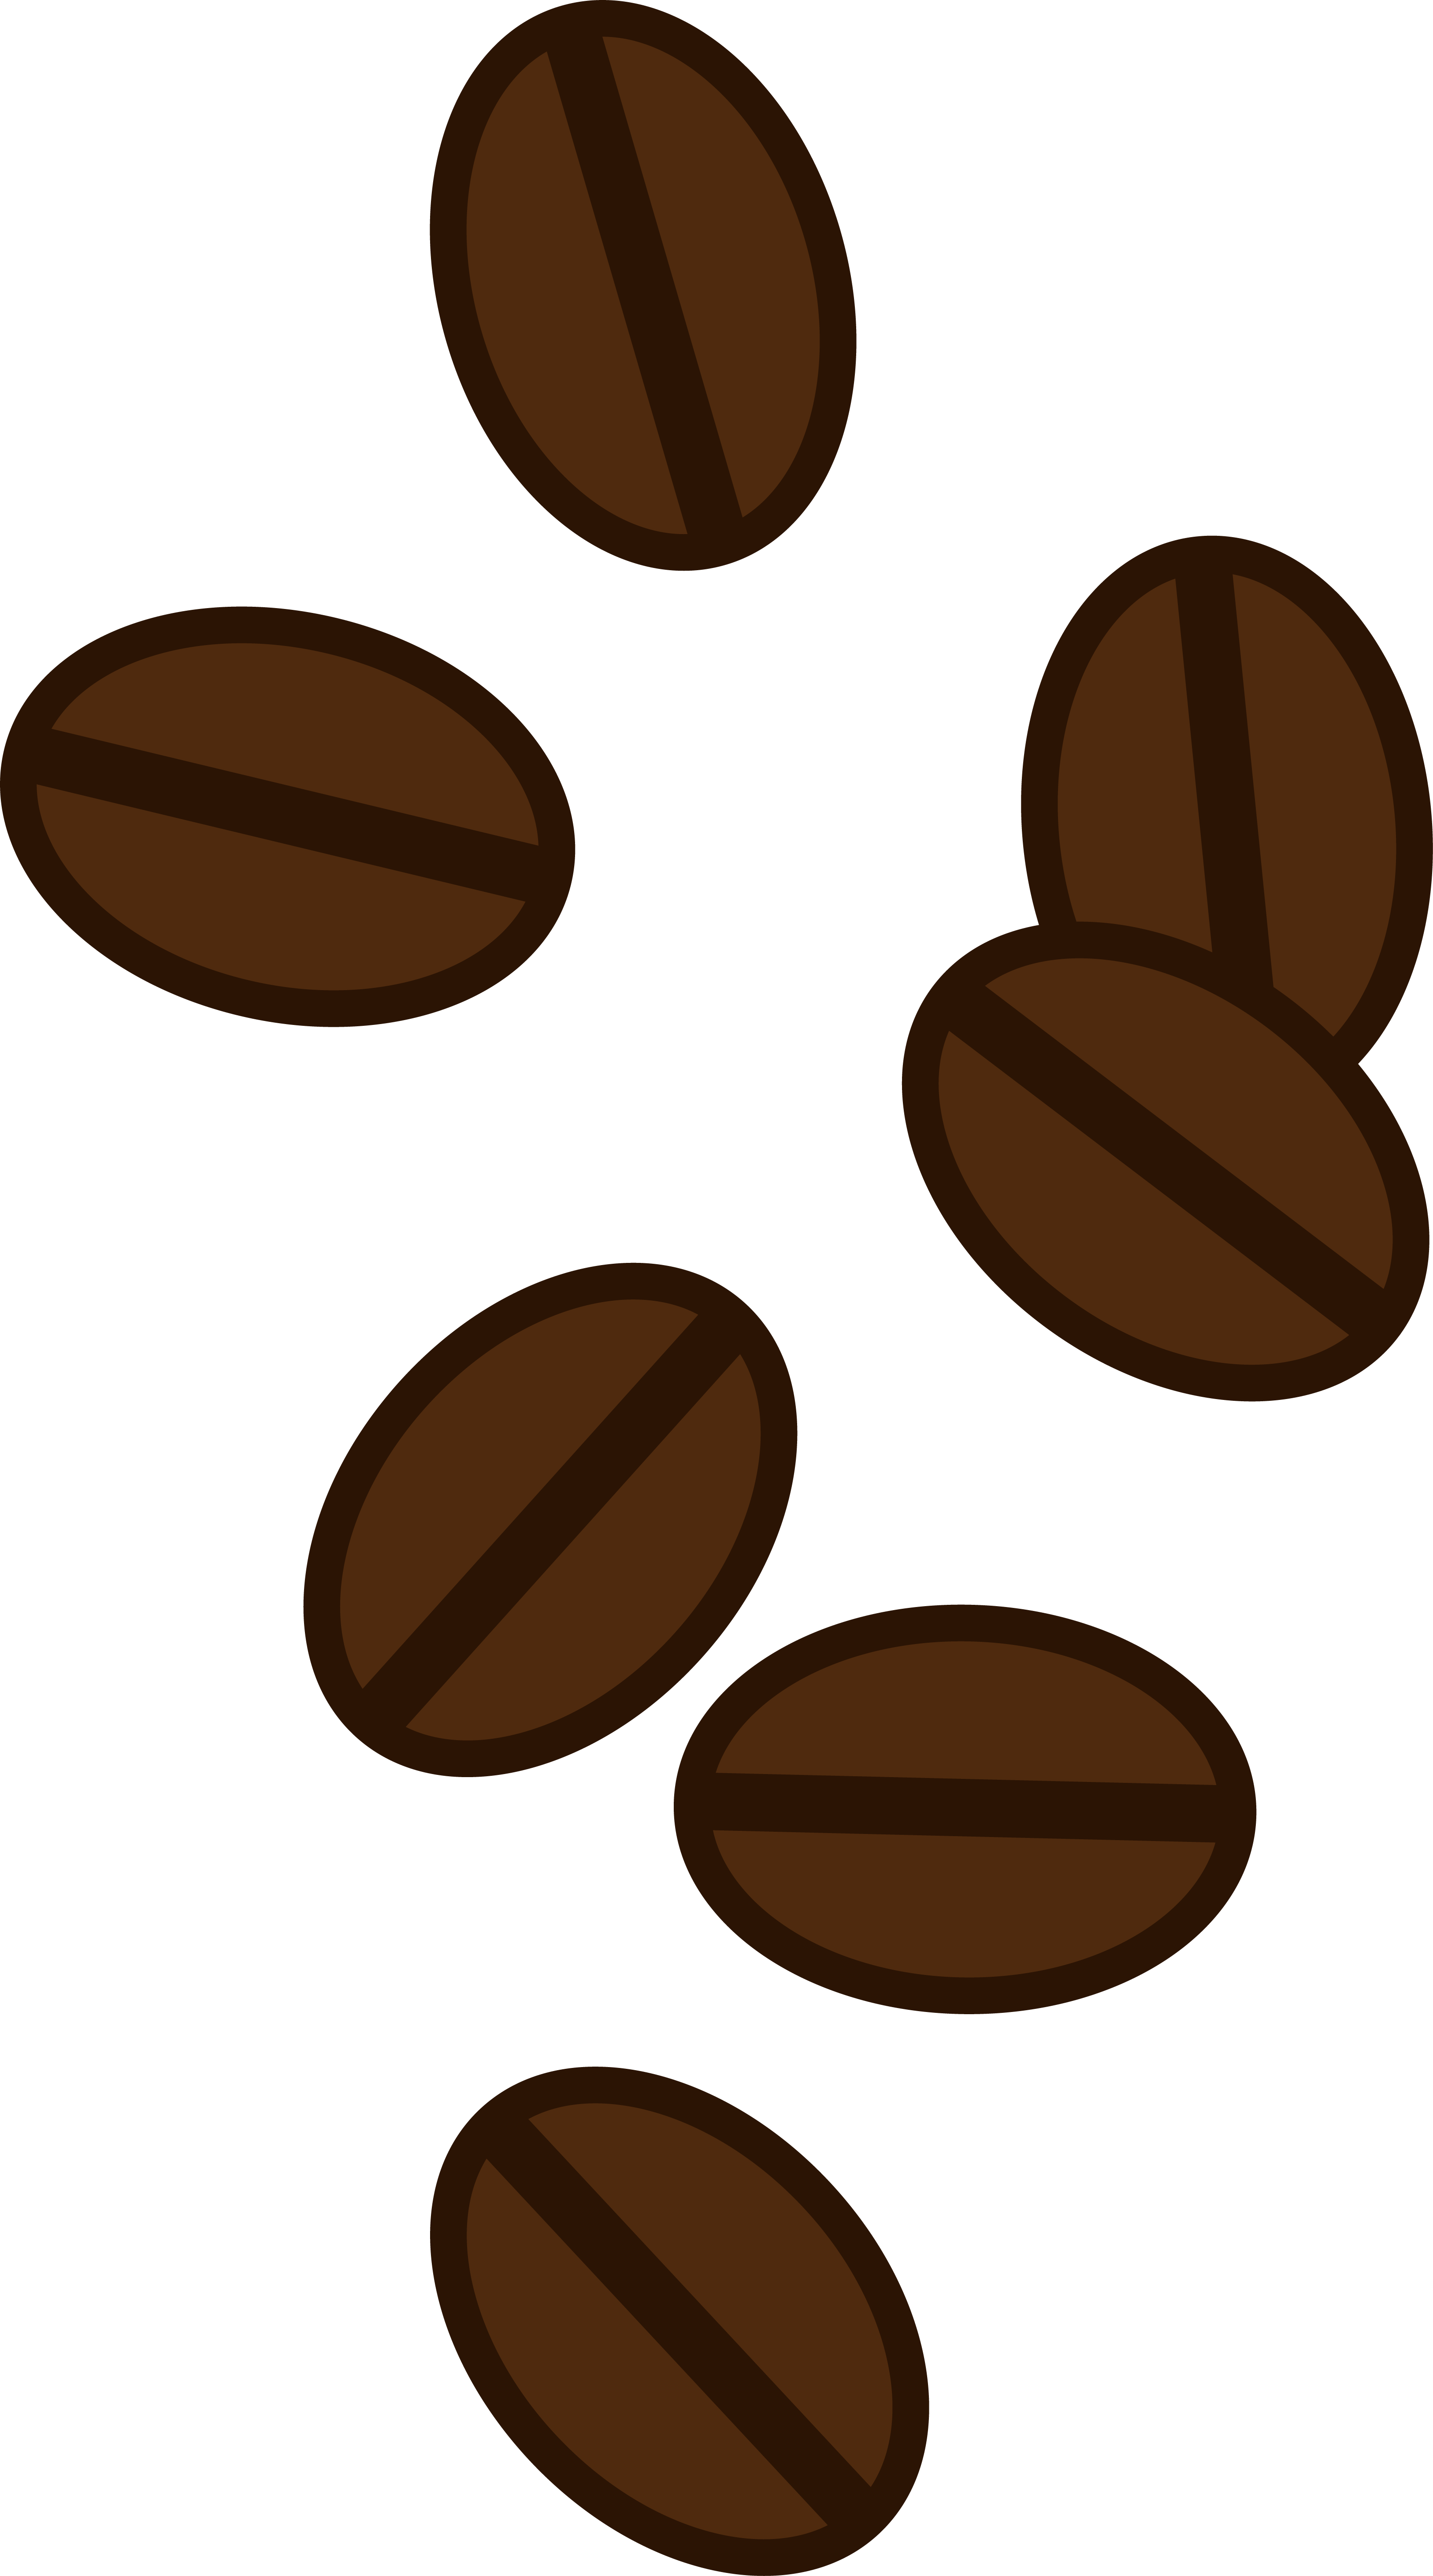 Coffee Beans Clipart | Clipart library - Free Clipart Images